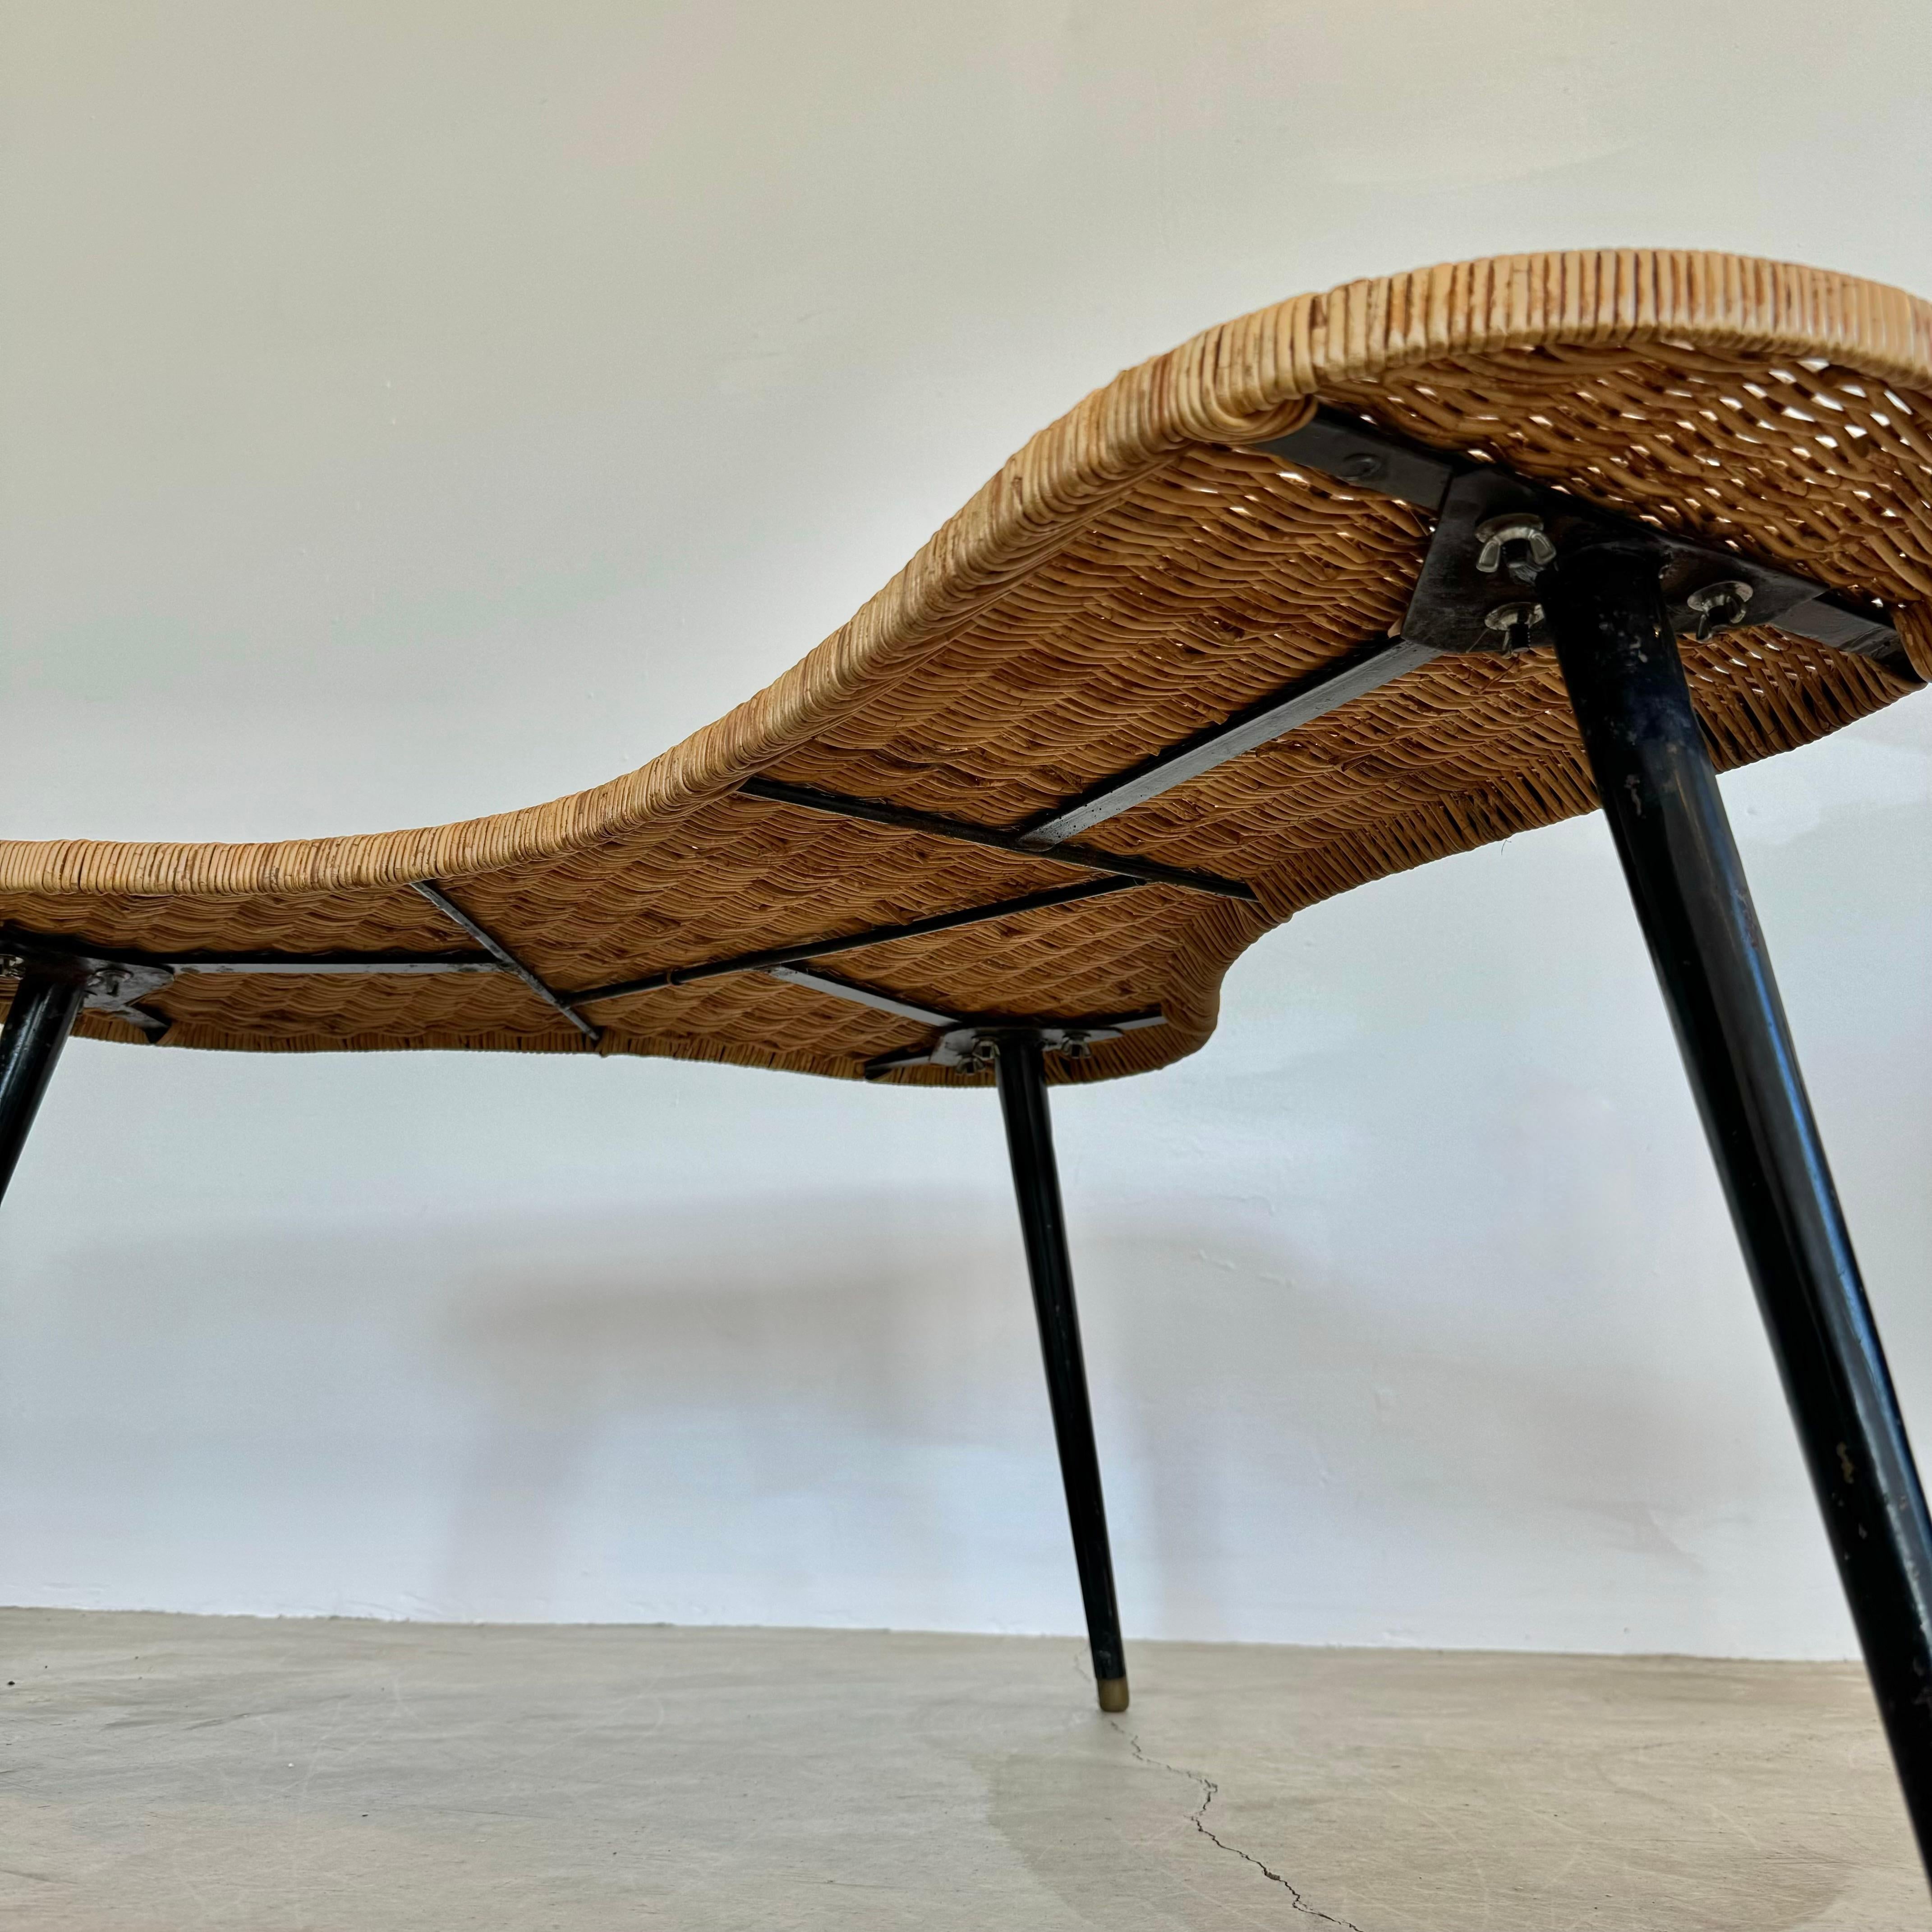 Biomorphic Wicker and Iron Coffee Table, 1950s France For Sale 3